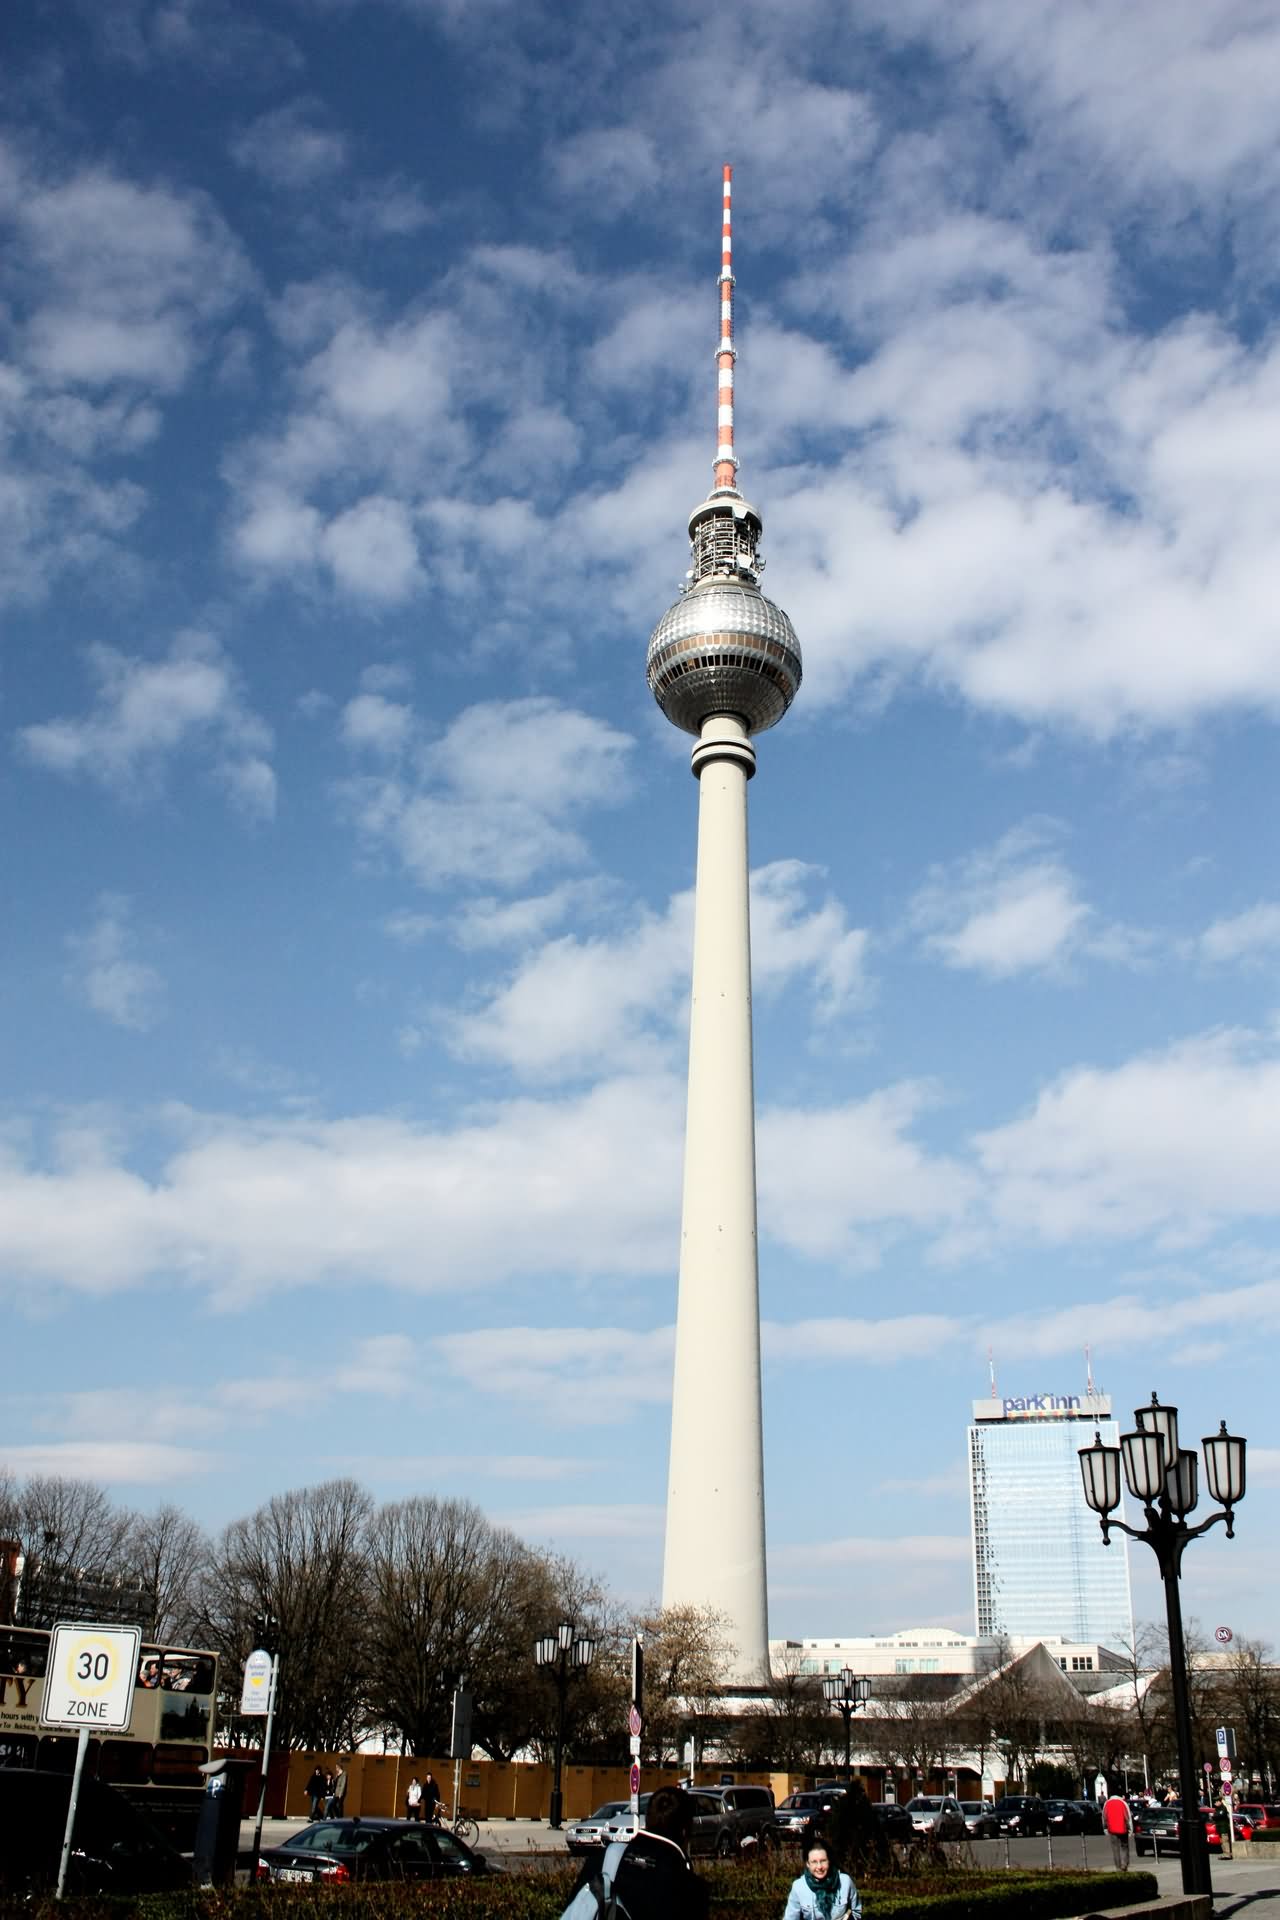 Amazing Picture Of The Fernsehturm Tower In Berlin